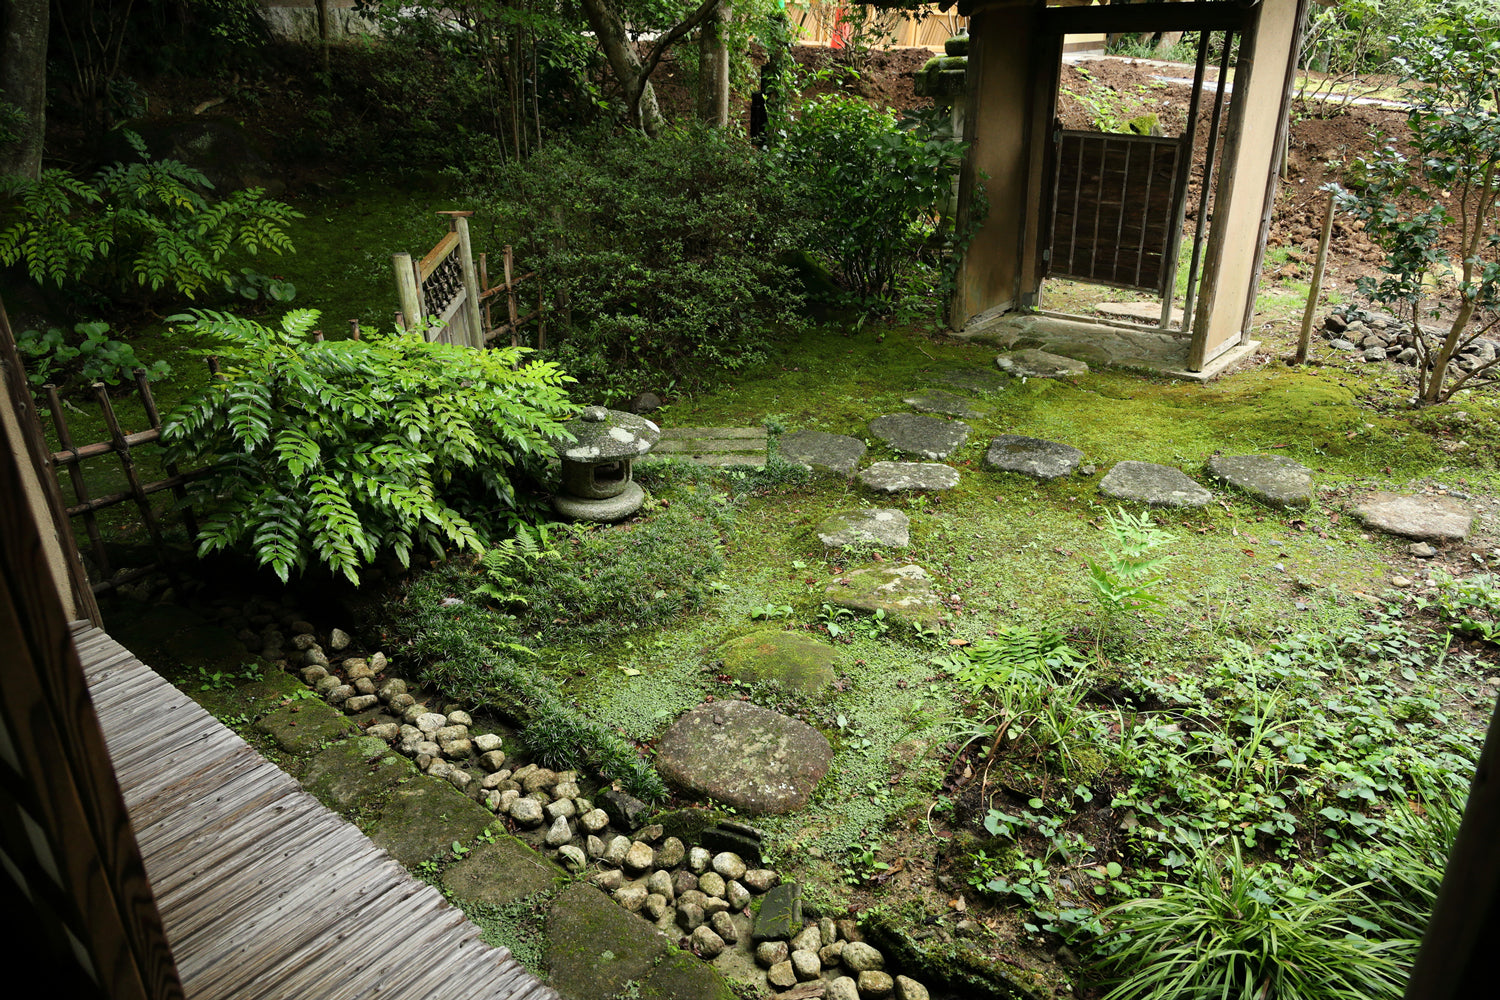 A stone garden path, surrounded by vibrant green foliage, leading to a tea house entryway.